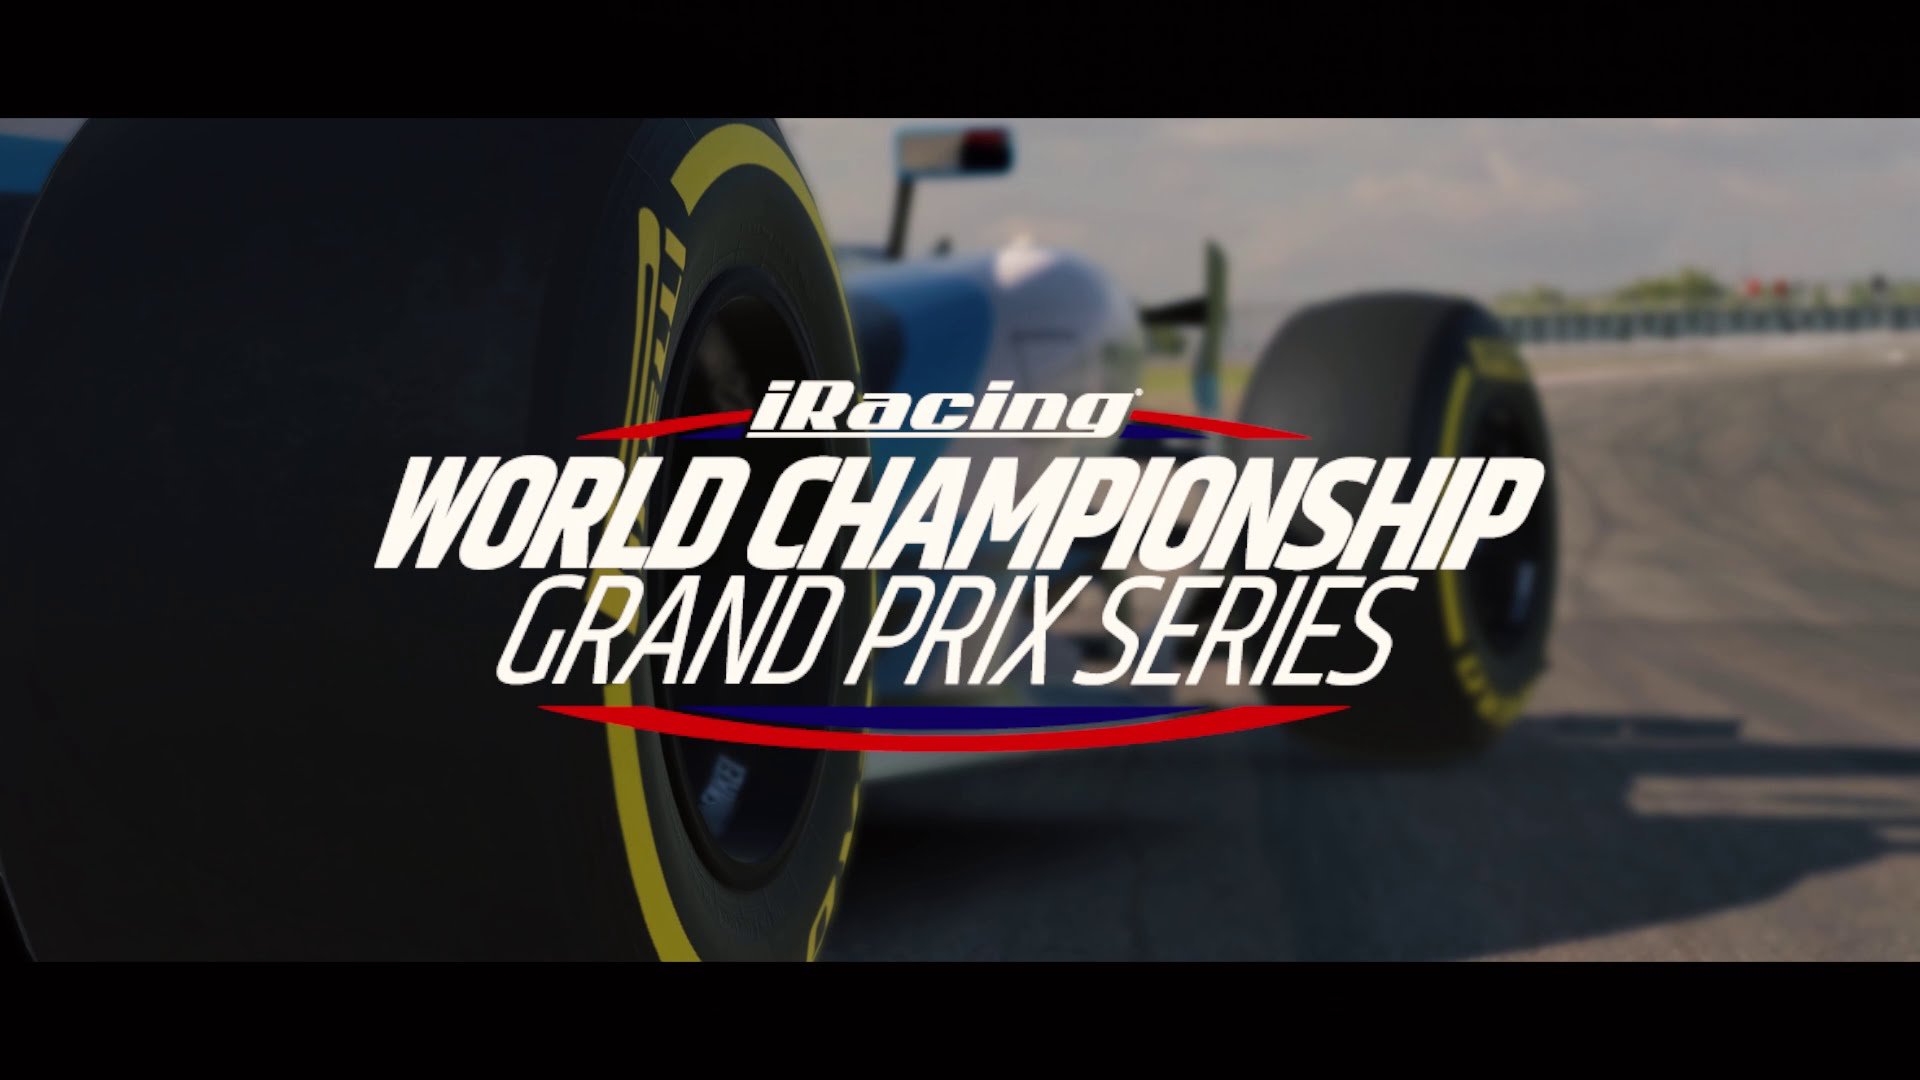 More information about "iRacing World Championship Grand Prix Series LIVE"